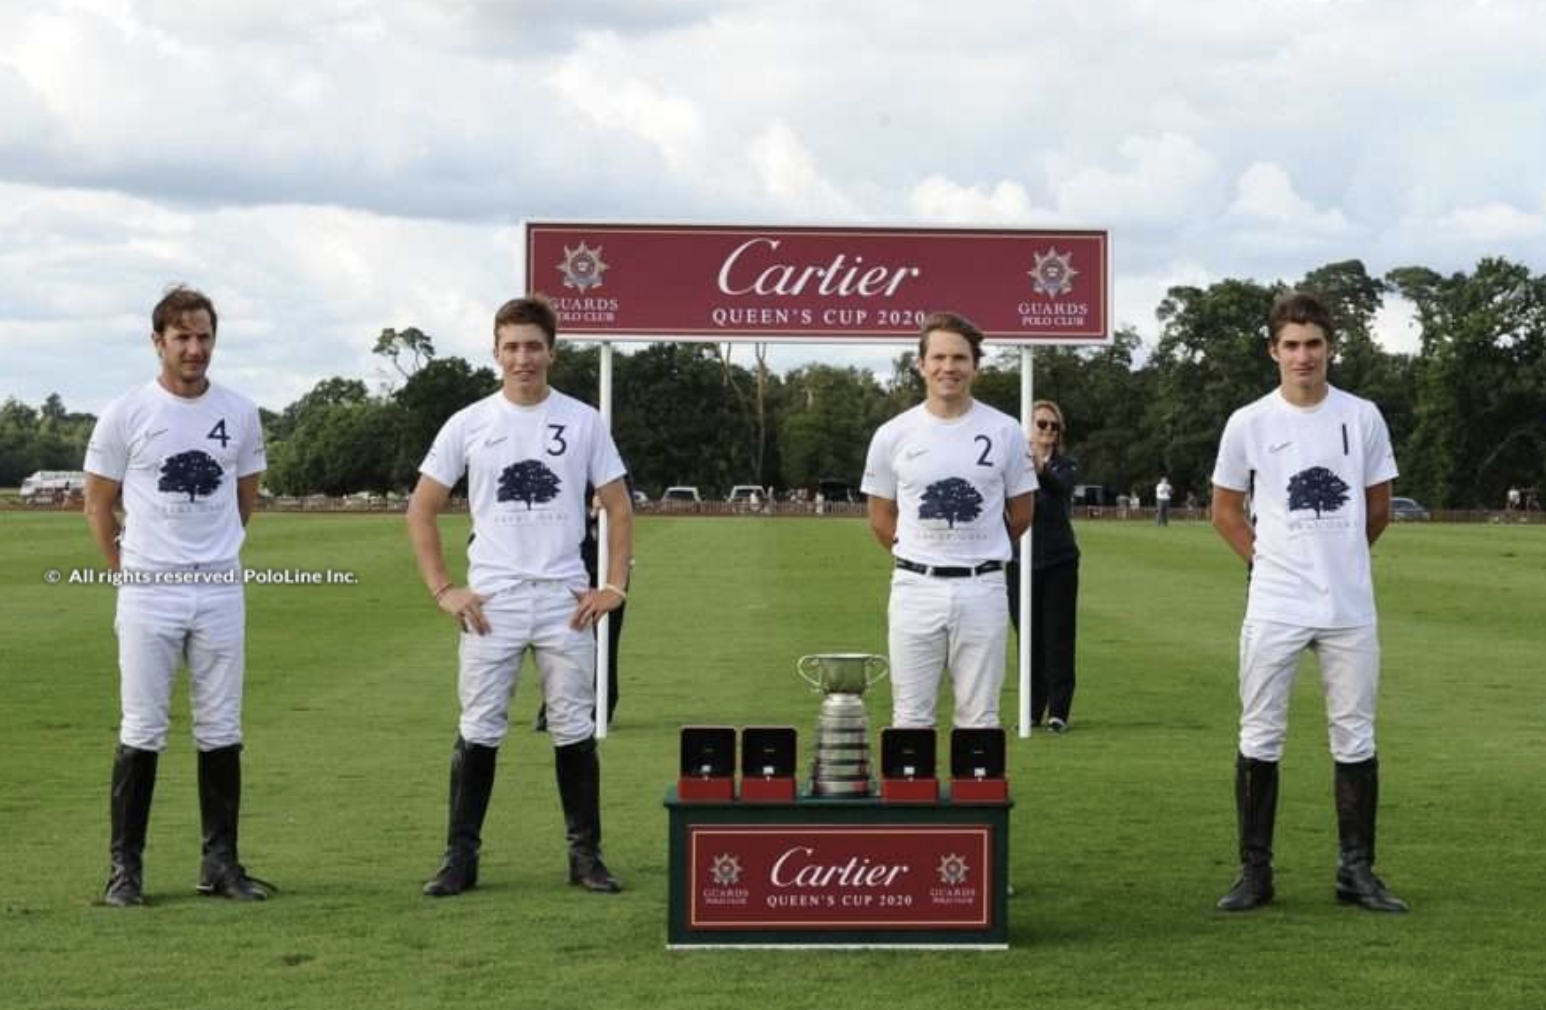 The victors in the Queens Cup - pic by Polo Line Inc.